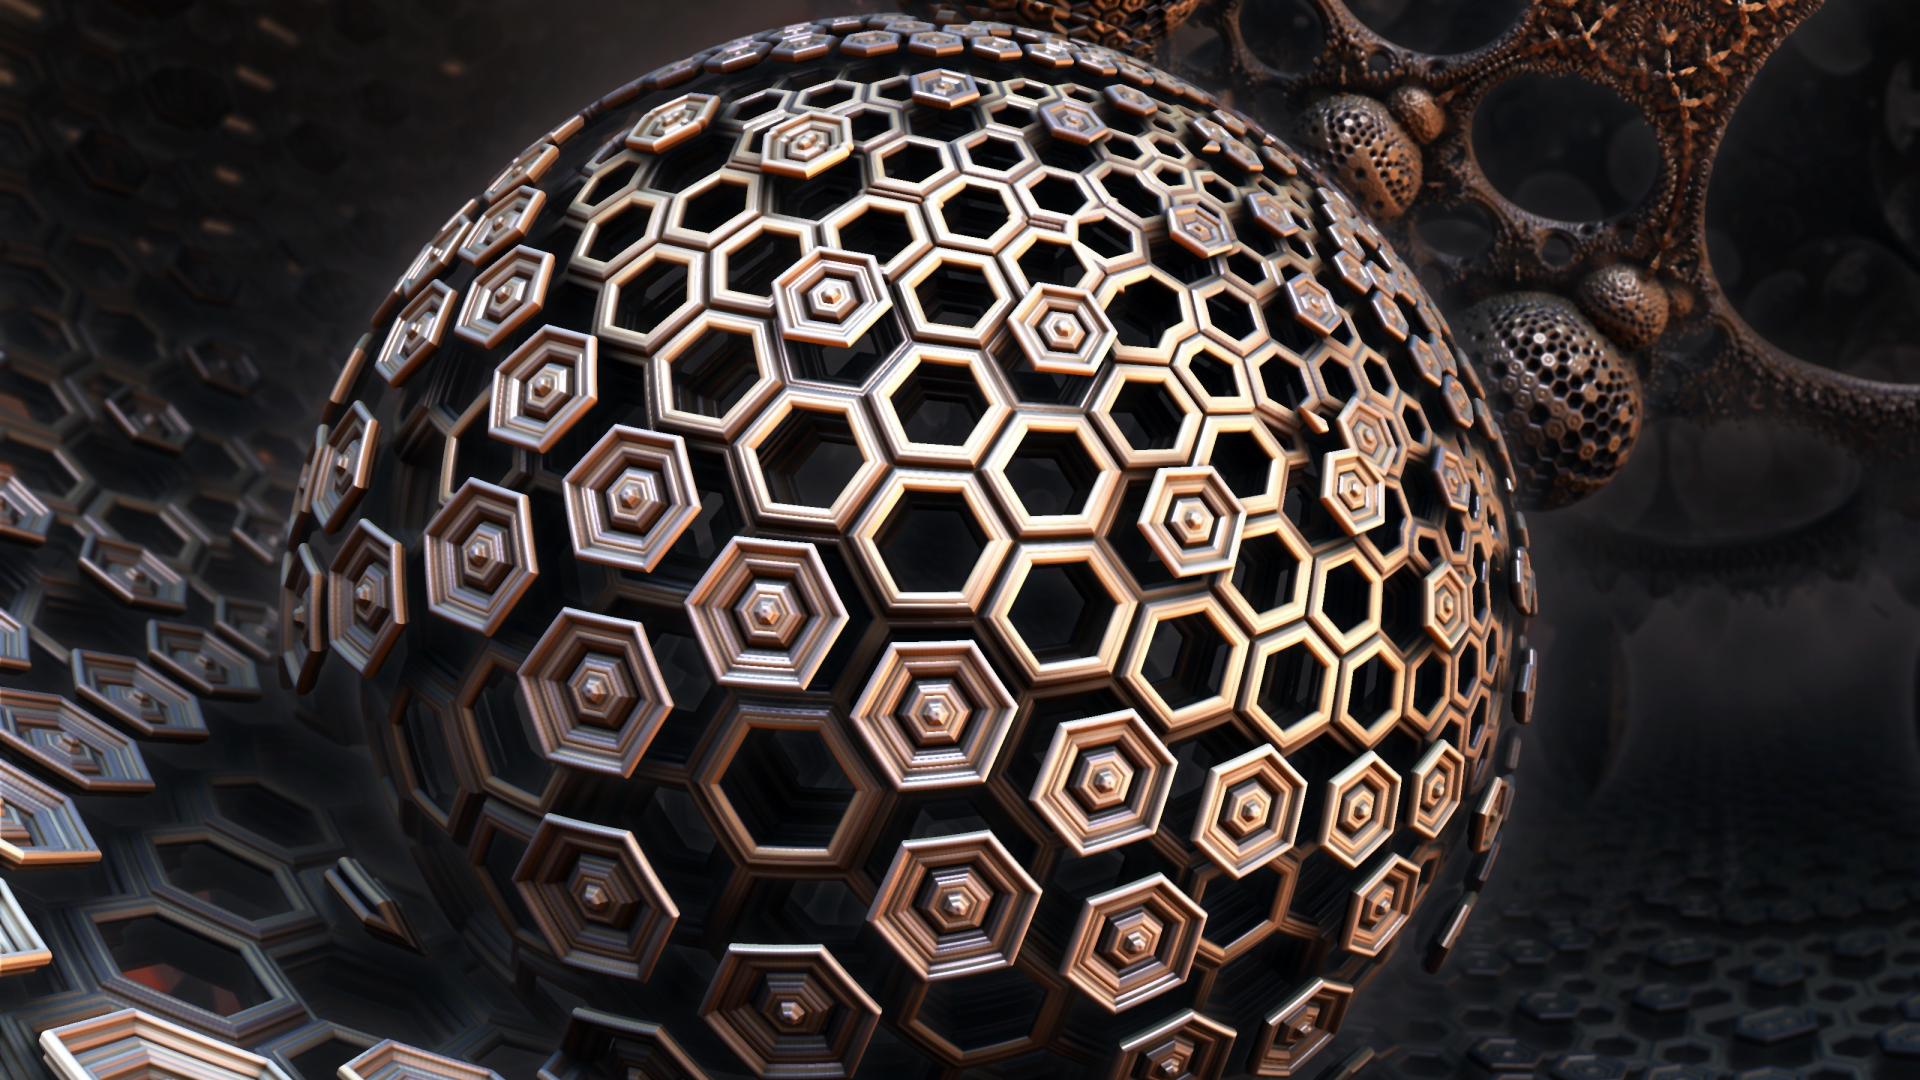 Hive Wallpaper Free Hive Background